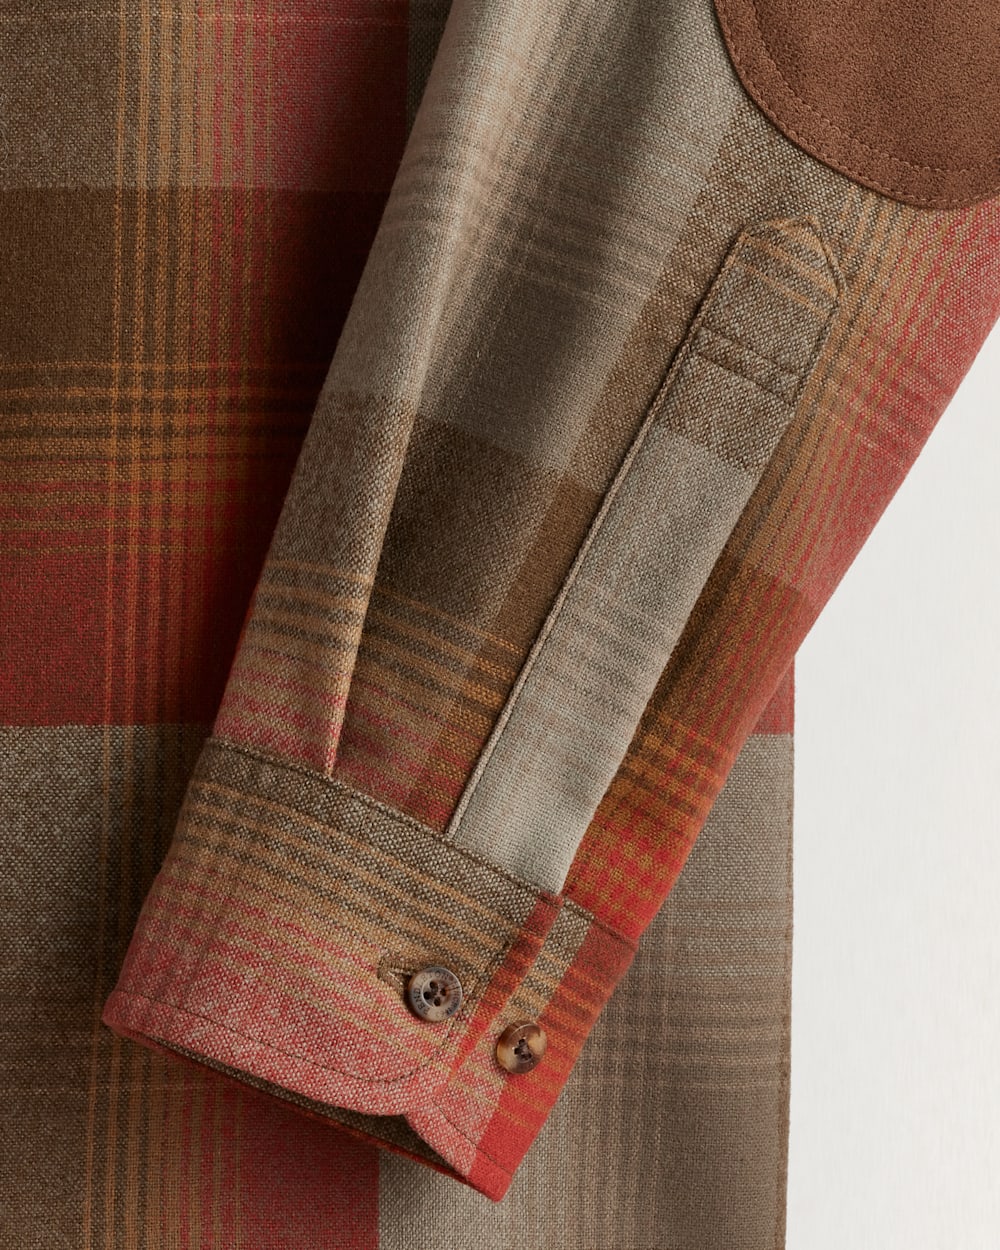 ALTERNATE VIEW OF MEN'S PLAID ELBOW-PATCH TRAIL SHIRT IN TAN/RED PLAID image number 2